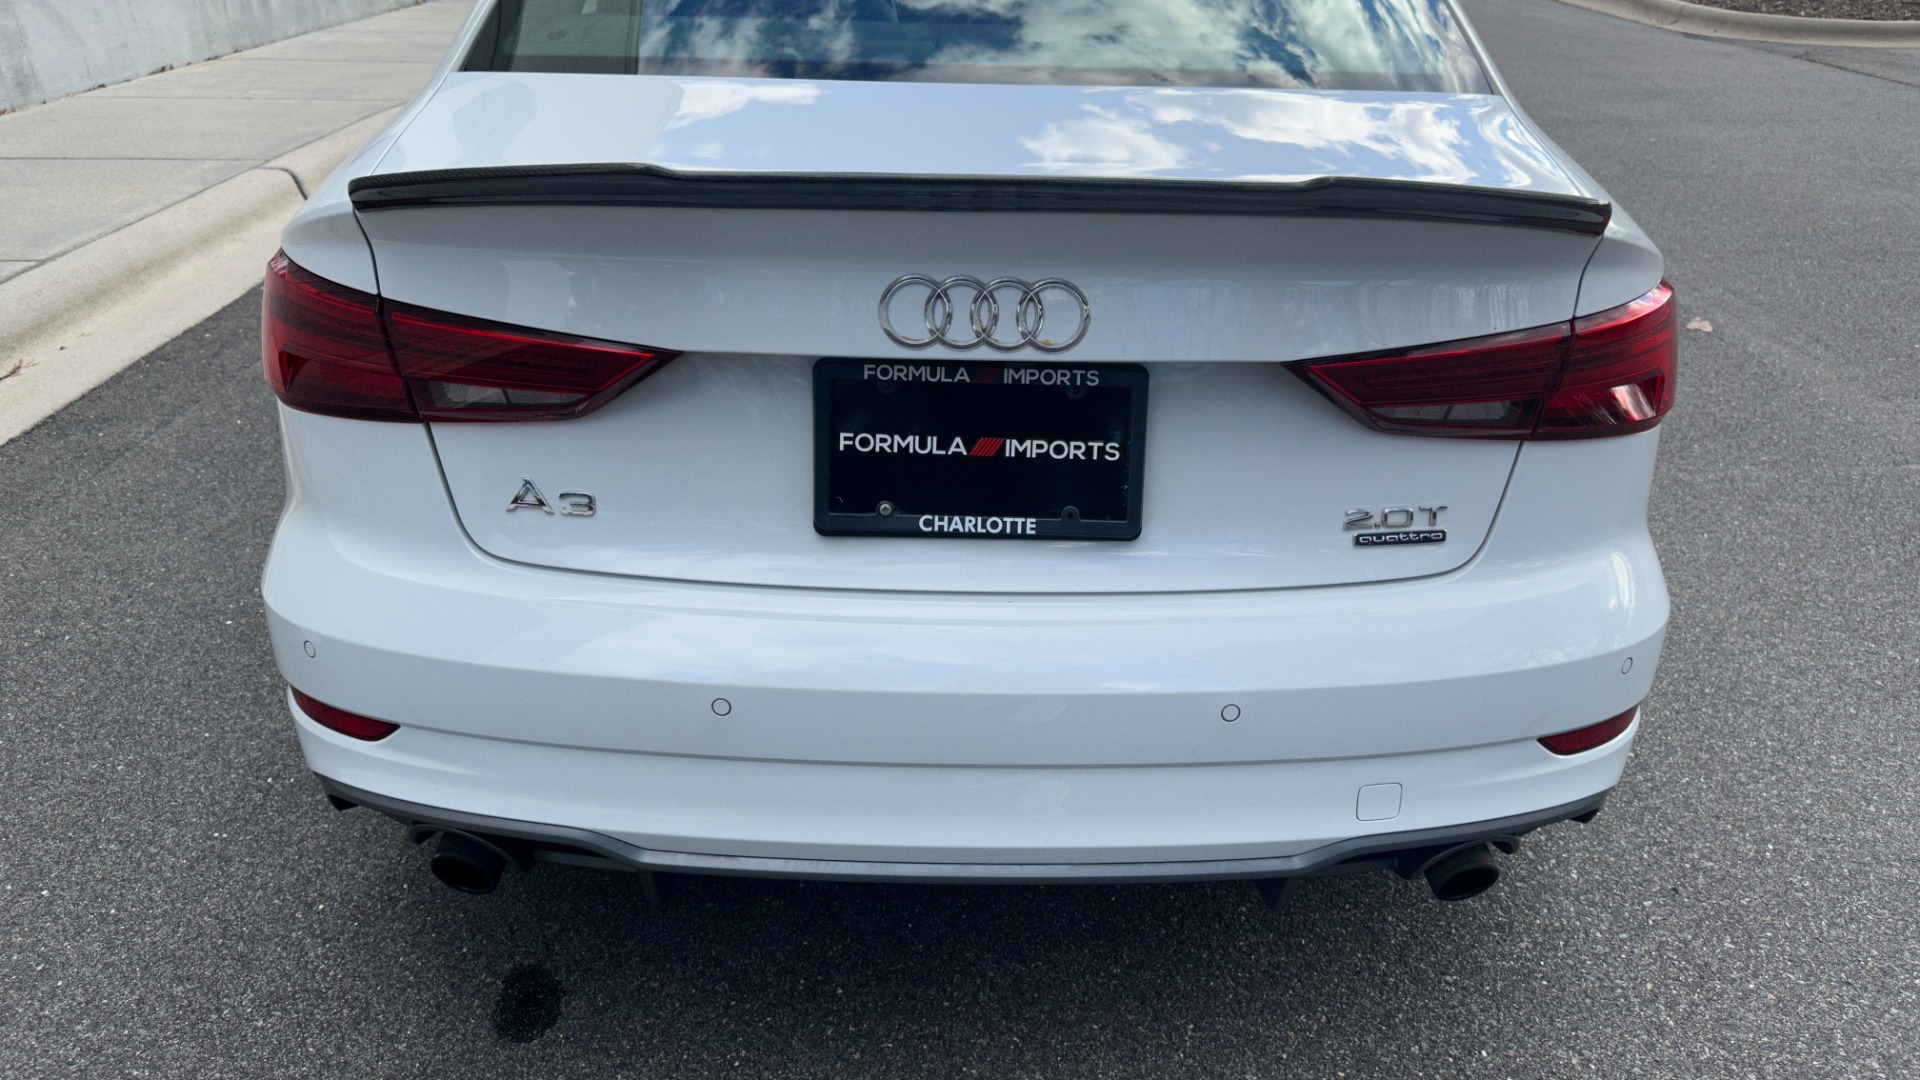 Used 2017 Audi A3 Sedan PREMIUM PLUS / SPORT PACKAGE / LIGHT PACKAGE / SPORT SUSPENSION / B&O SOUND for sale $21,995 at Formula Imports in Charlotte NC 28227 9